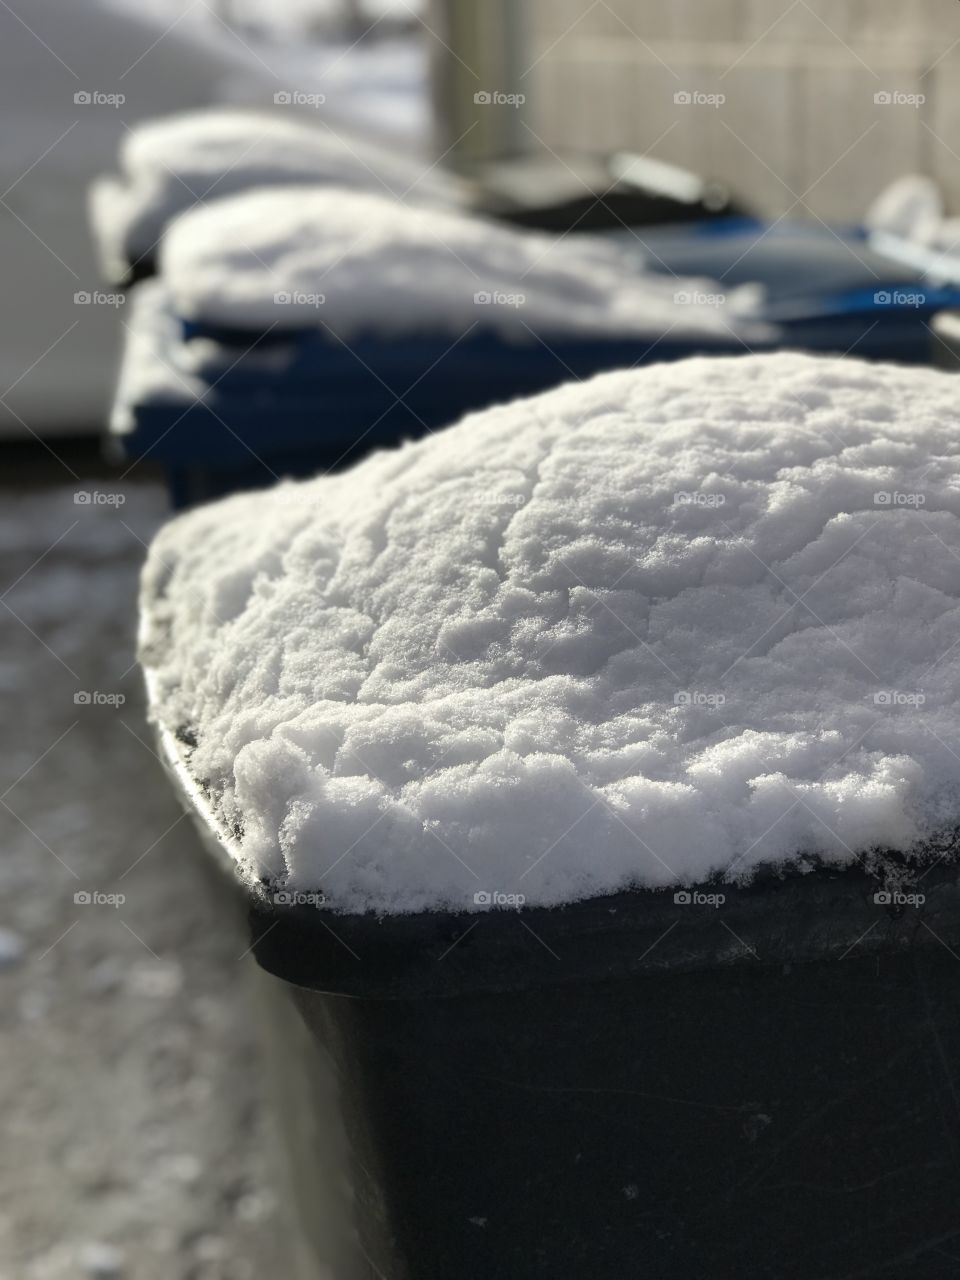 Snow on garbage cans